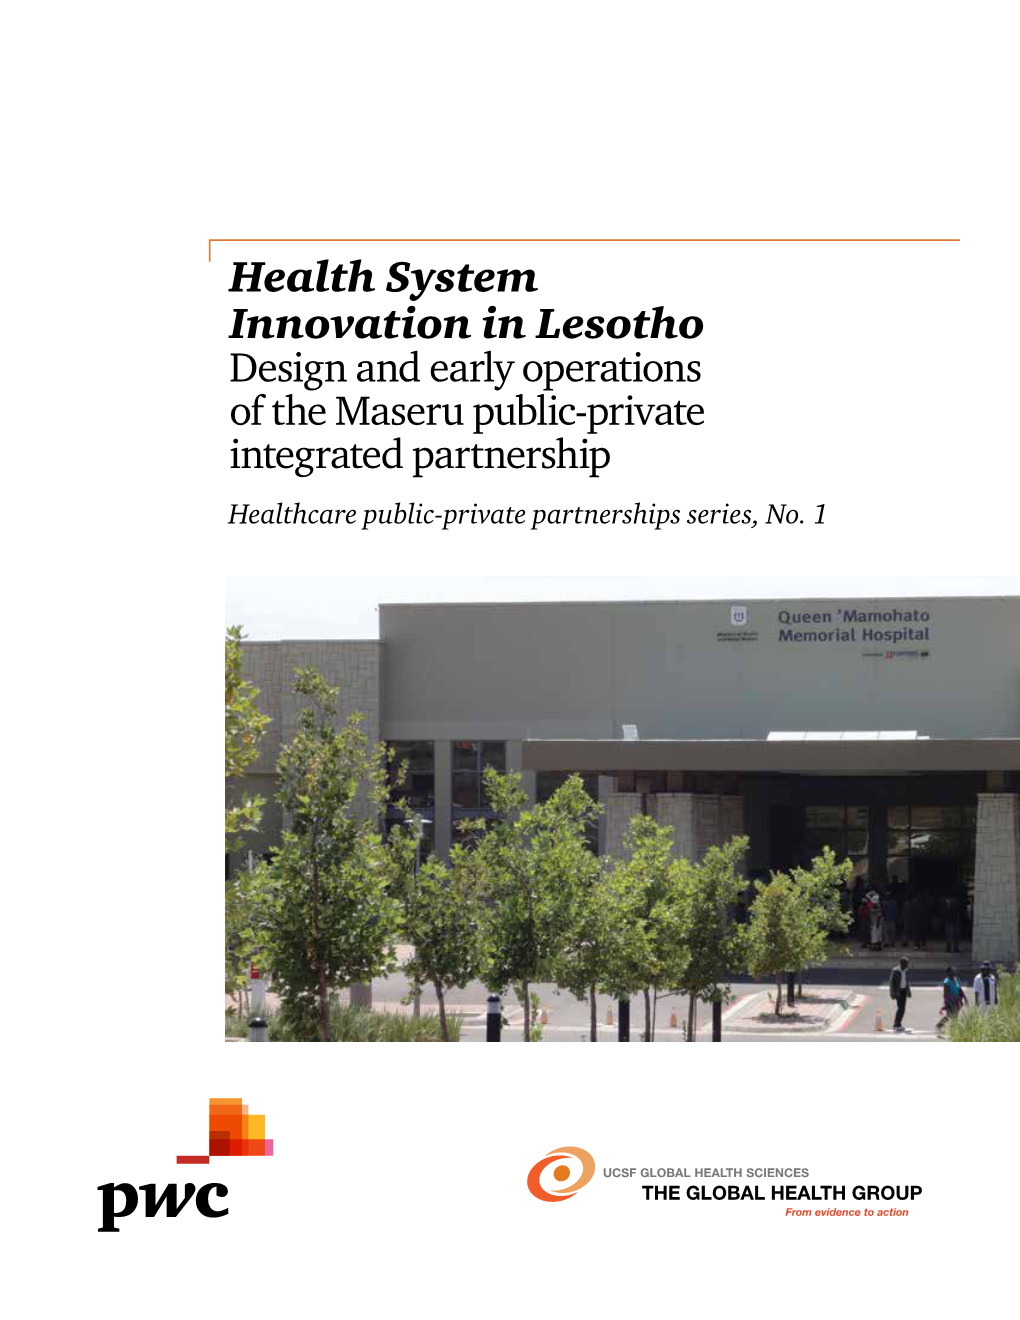 Health System Innovation in Lesotho Design and Early Operations of the Maseru Public-Private Integrated Partnership Healthcare Public-Private Partnerships Series, No